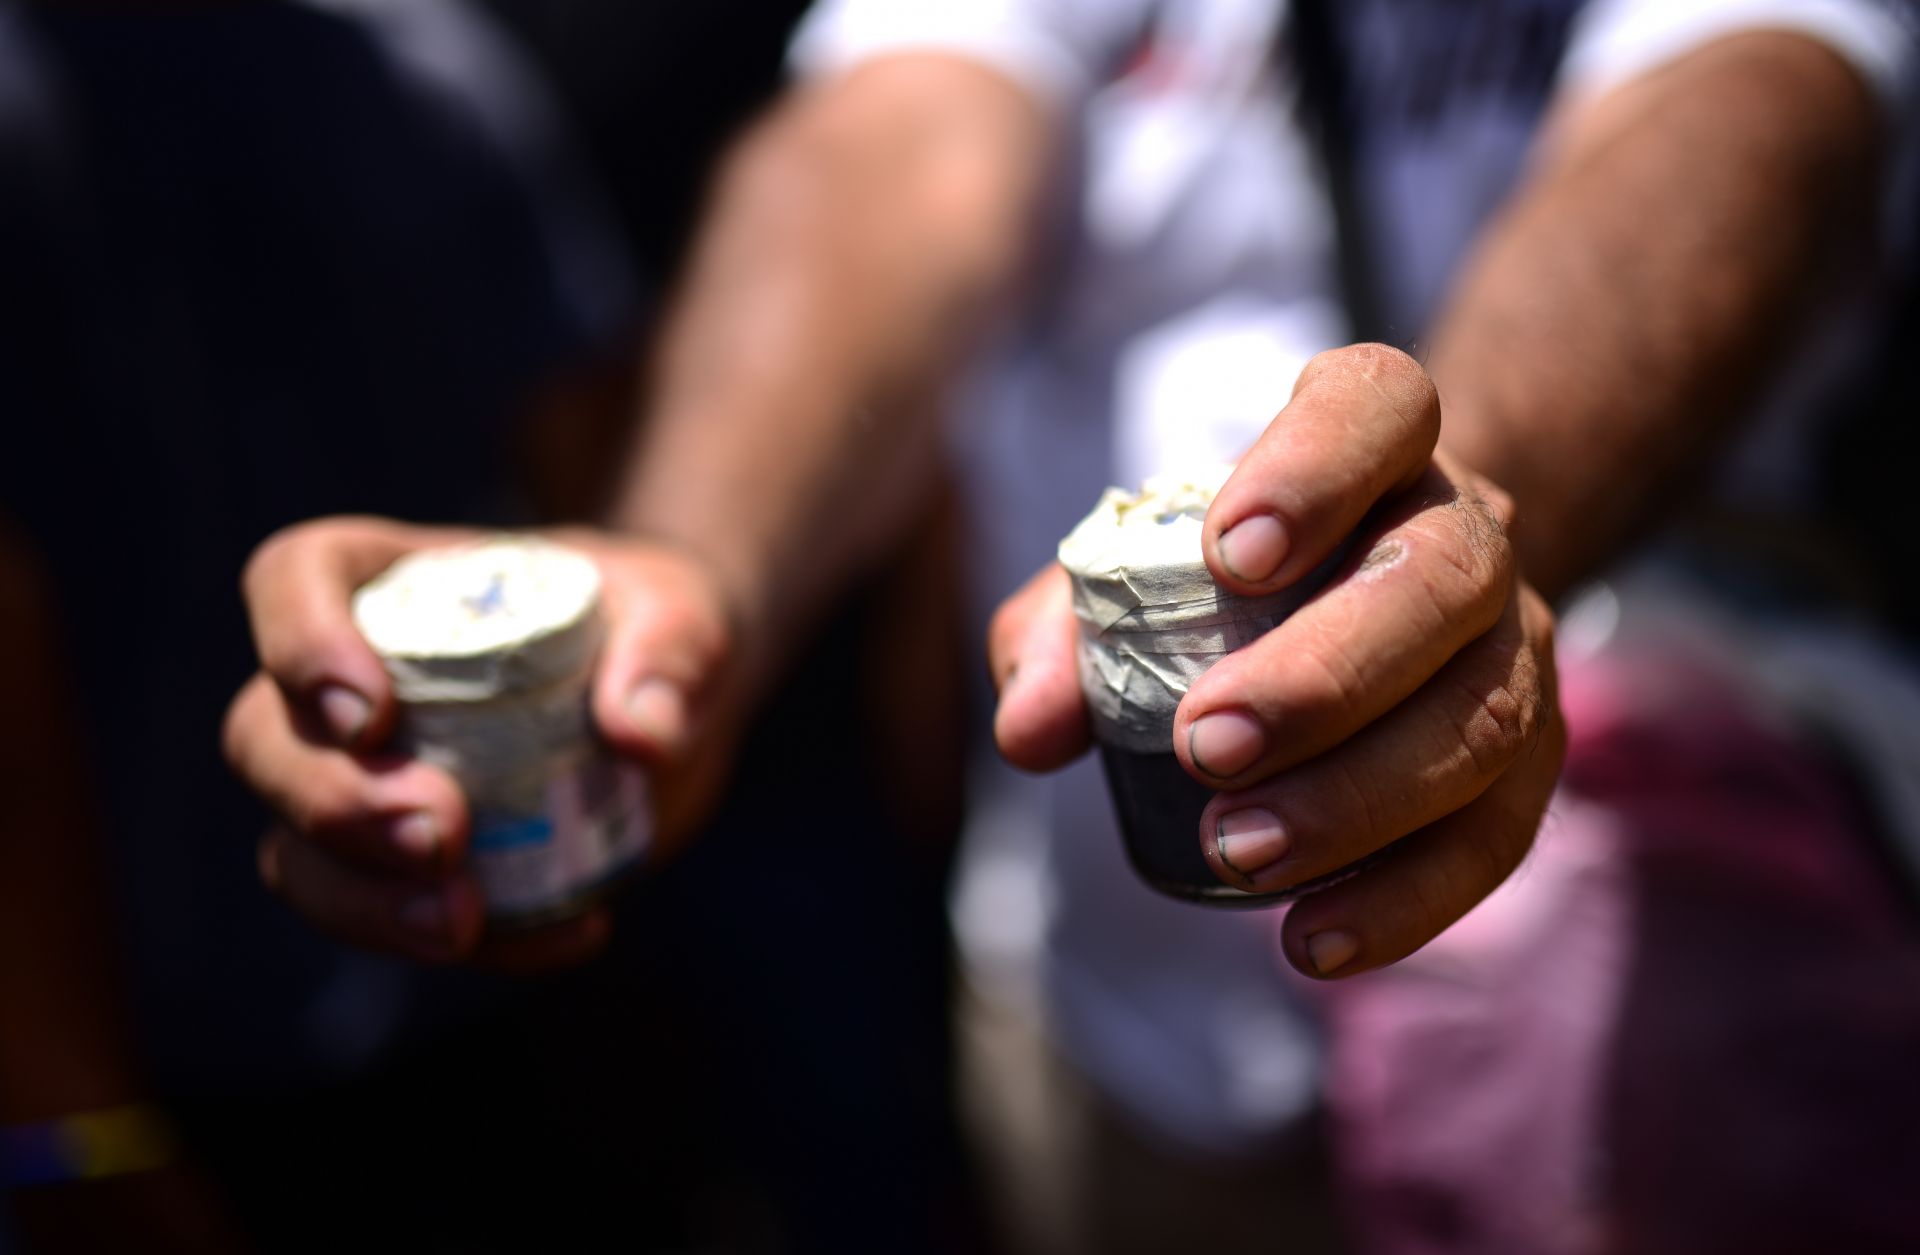 A protestor in Nicaragua shows off two homemade bombs.